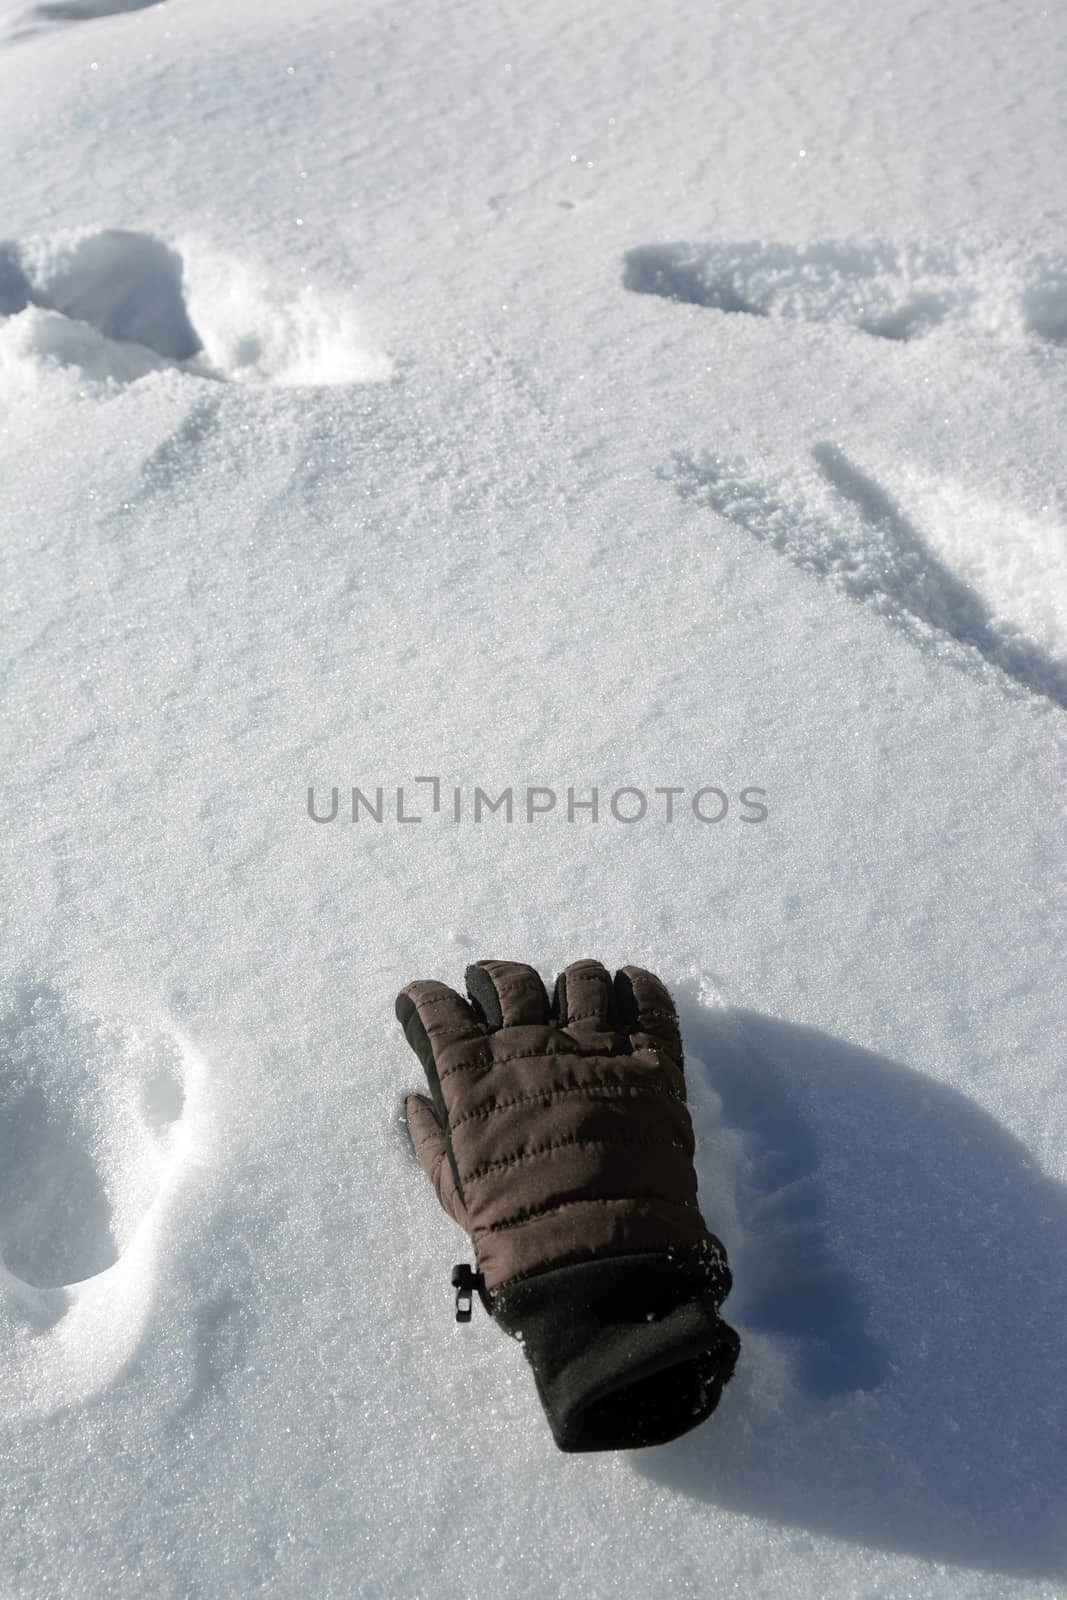 glove on snow by think4photop